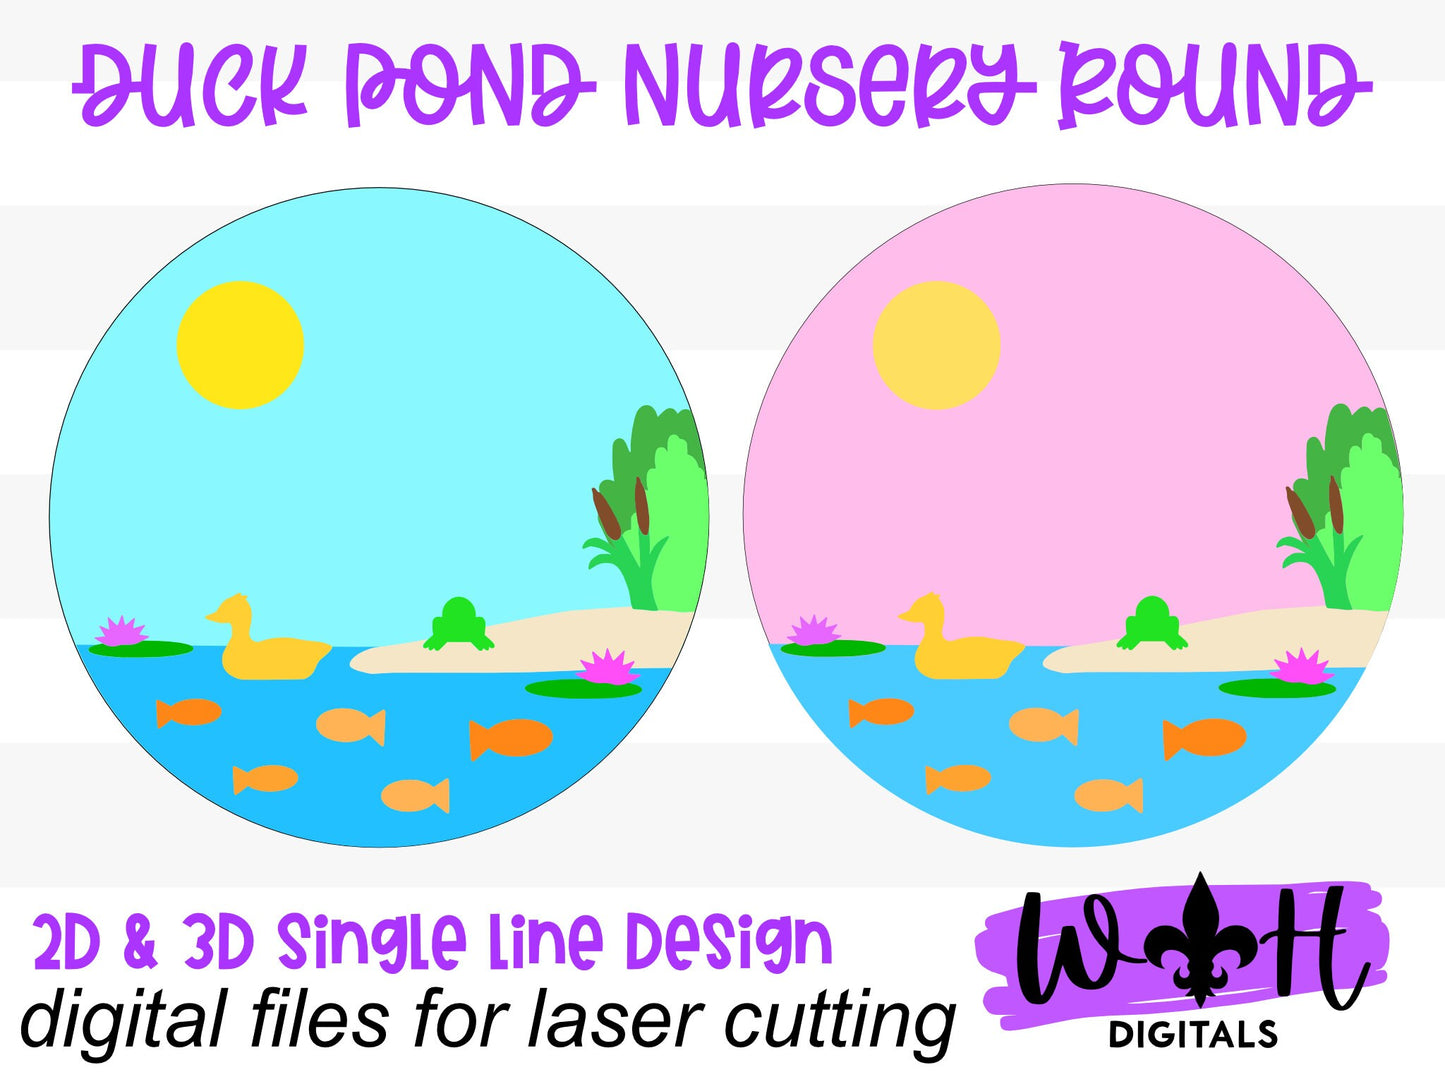 Duck Pond and Goldfish Baby Nursery Round - Sign Making Home Decor and DIY Kits - Cut File For Glowforge Lasers - Digital SVG File